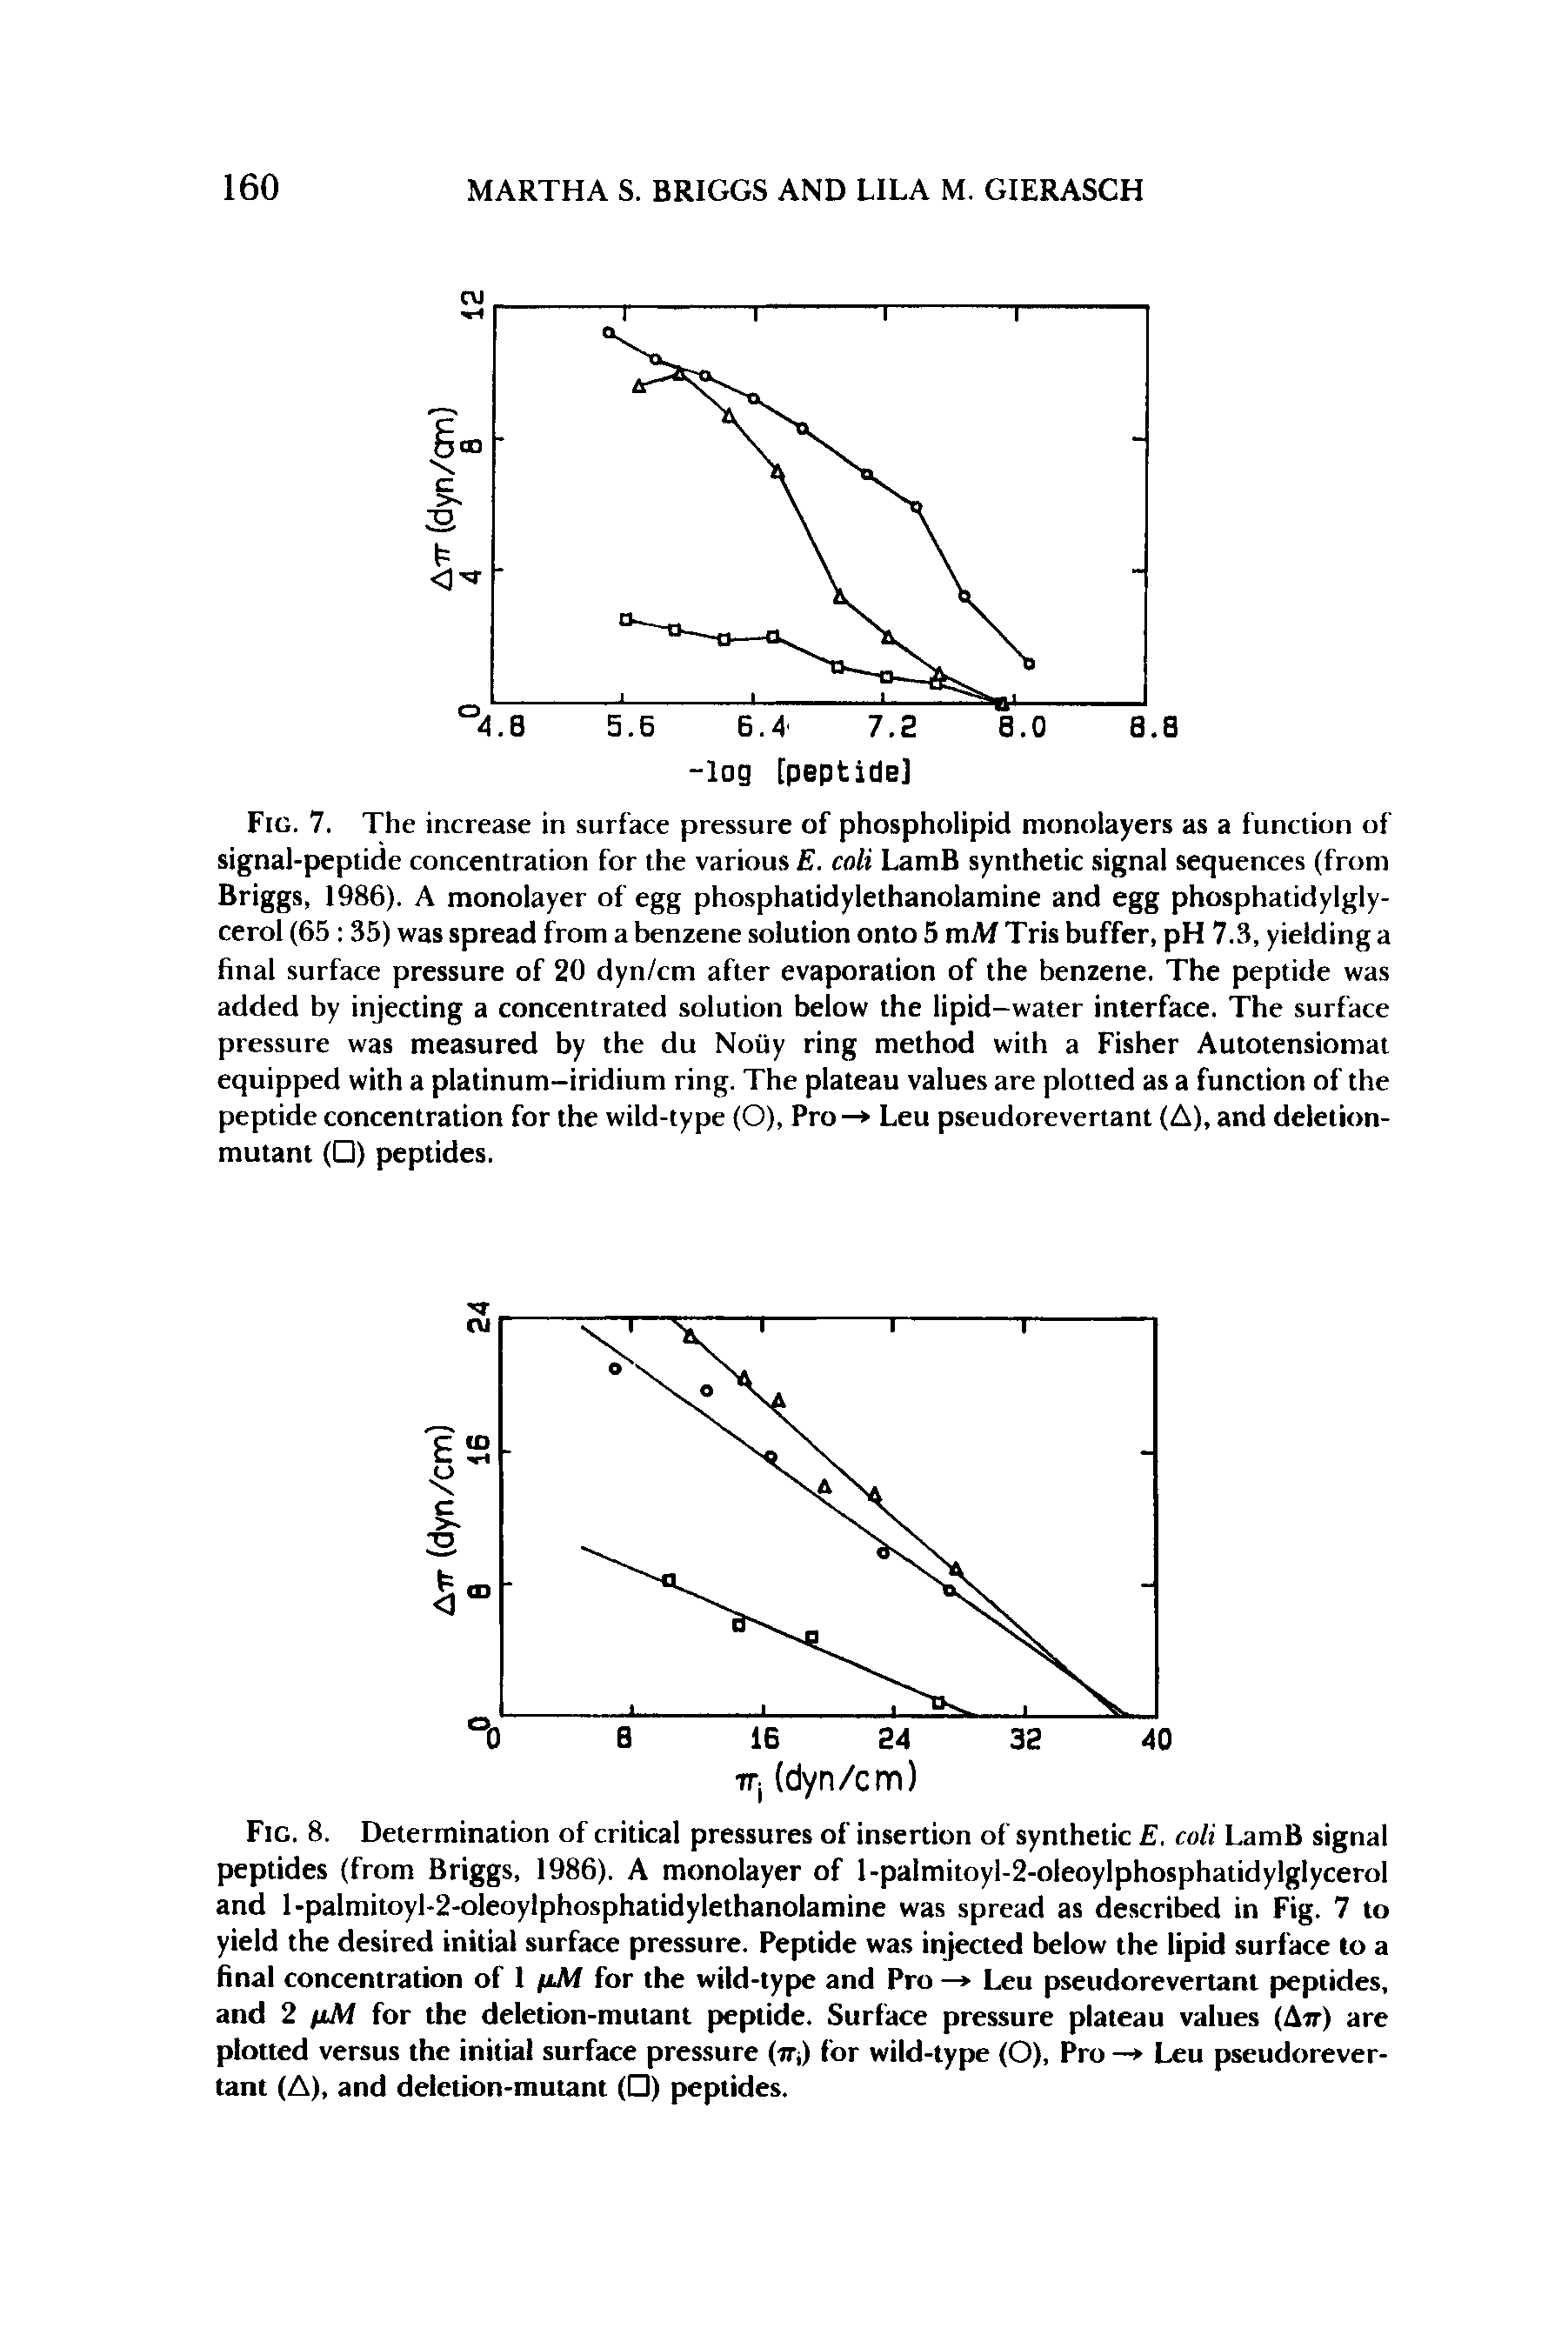 Fig. 7. The increase in surface pressure of phospholipid monolayers as a function of signal-peptide concentration for the various E. coli LamB synthetic signal sequences (from Briggs, 1986). A monolayer of egg phosphatidylethanolamine and egg phosphatidylgly-cerol (65 35) was spread from a benzene solution onto 5 mM Tris buffer, pH 7.3, yielding a hnal surface pressure of 20 dyn/cm after evaporation of the benzene. The peptide was added by injecting a concentrated solution below the lipid-water interface. The surface pressure was measured by the du Noiiy ring method with a Fisher Autotensiomat equipped with a platinum-iridium ring. The plateau values are plotted as a function of the peptide concentration for the wild-type (O), Pro— Leu pseudorevertant (A), and deletion-mutant ( ) peptides.